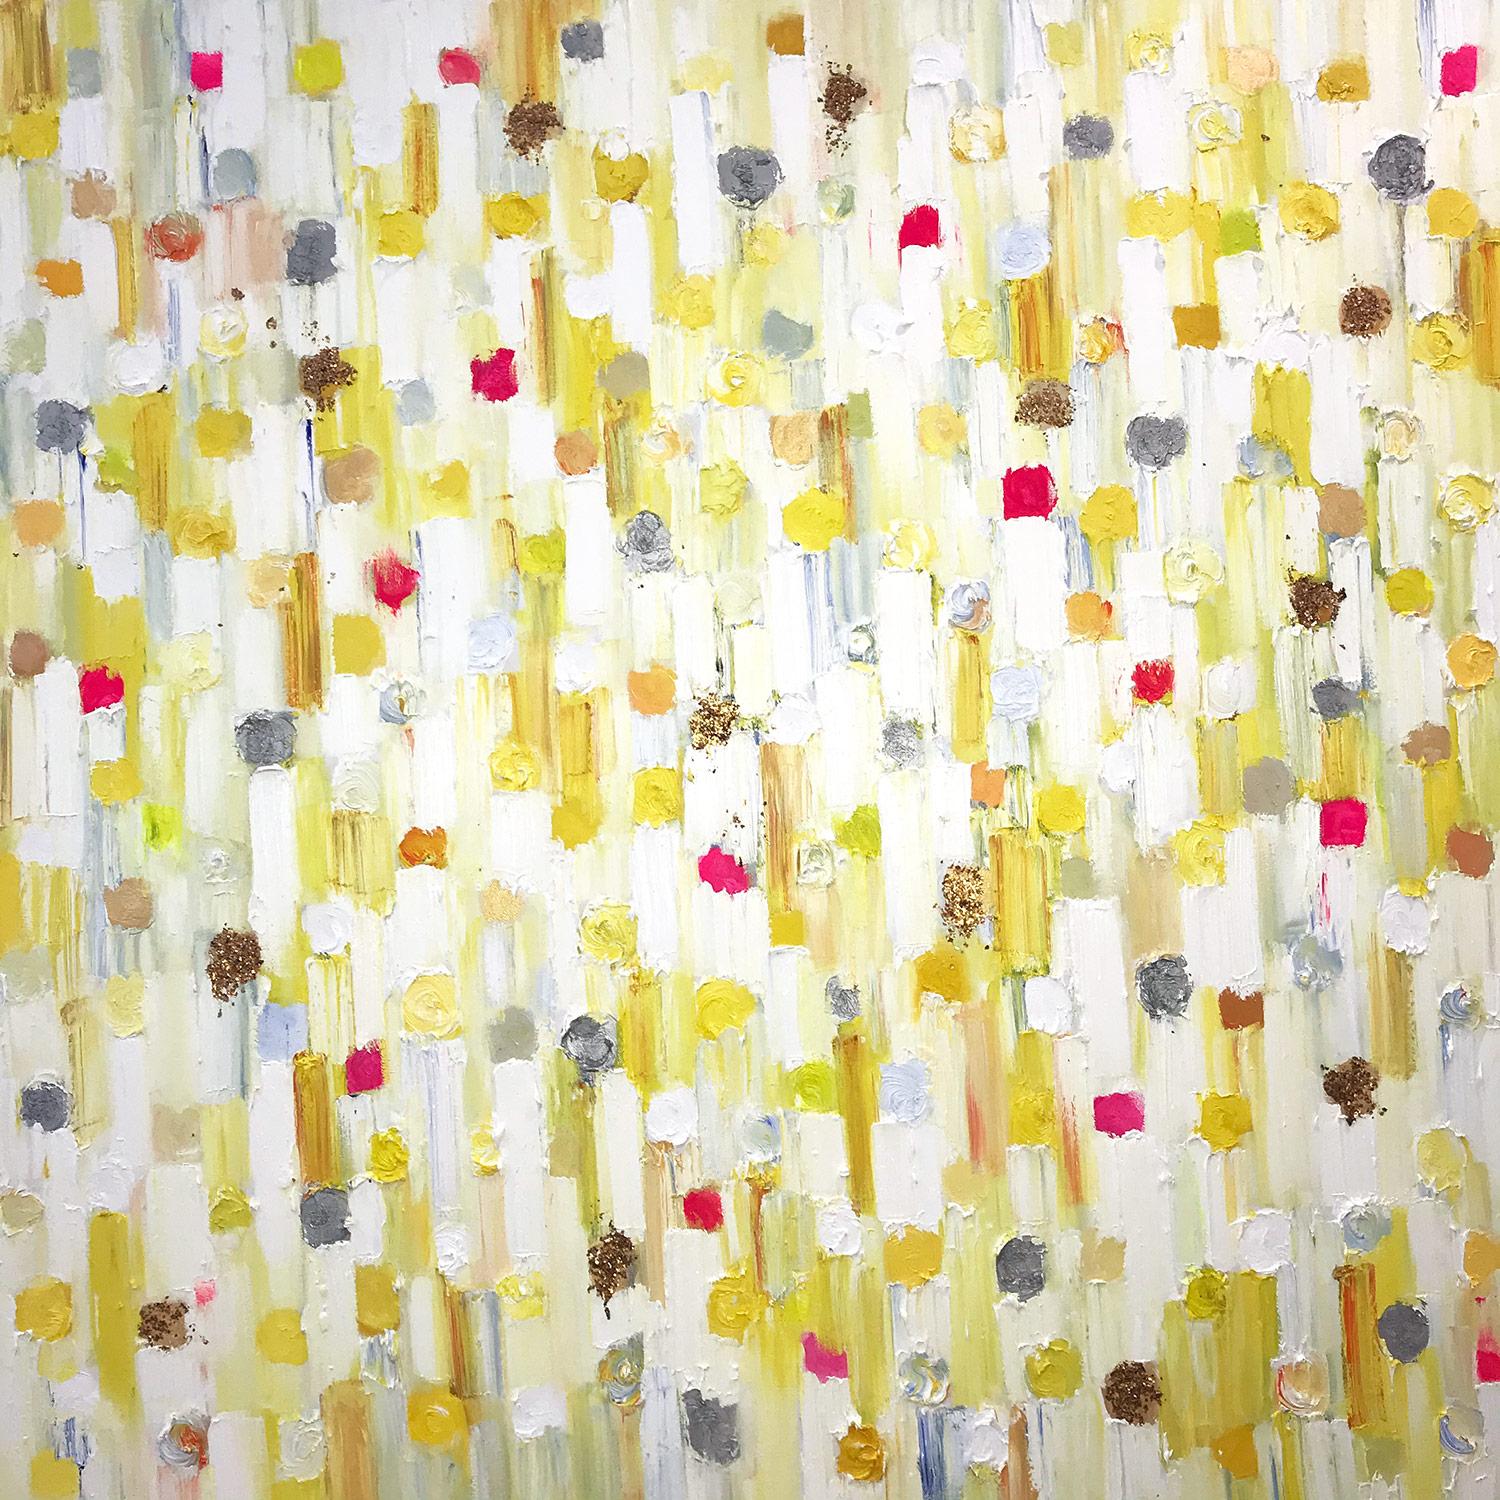 Cindy Shaoul Abstract Painting - "Dripping Dots - Monaco Sunrise" Contemporary Abstract Oil Painting on Canvas